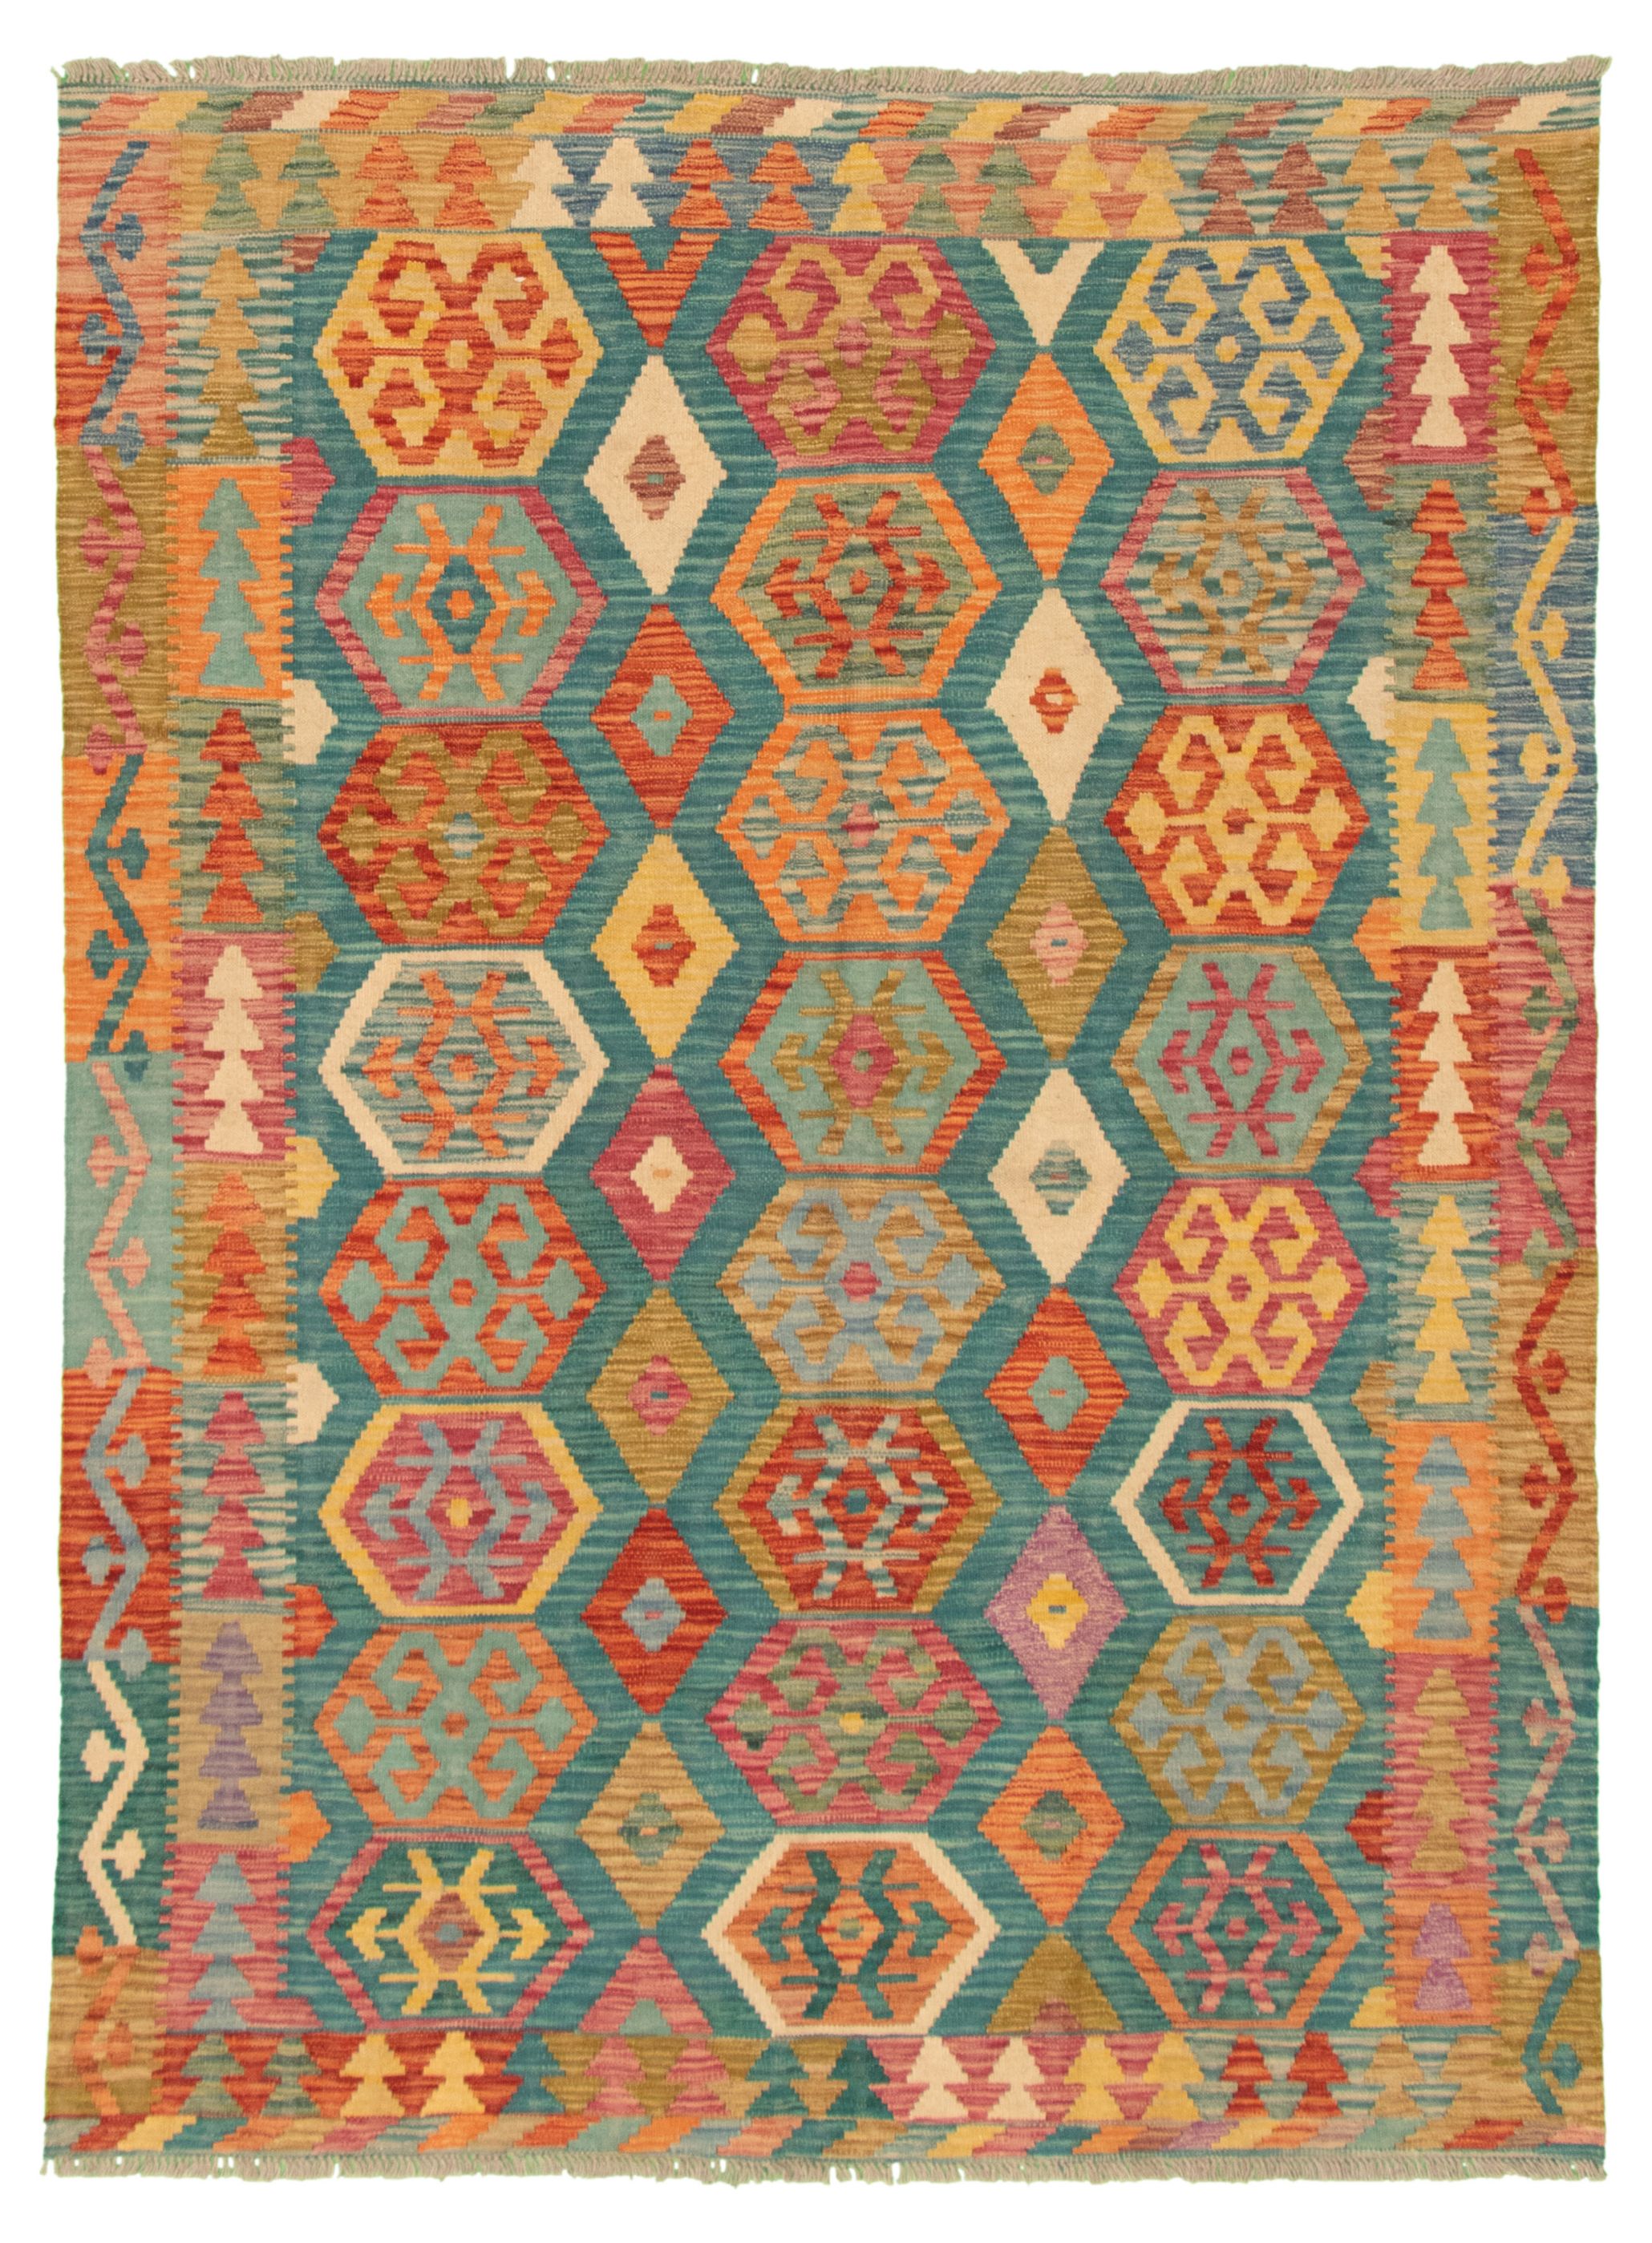 Hand woven Bold and Colorful  Turquoise Wool Kilim 5'10" x 7'10" Size: 5'10" x 7'10"  